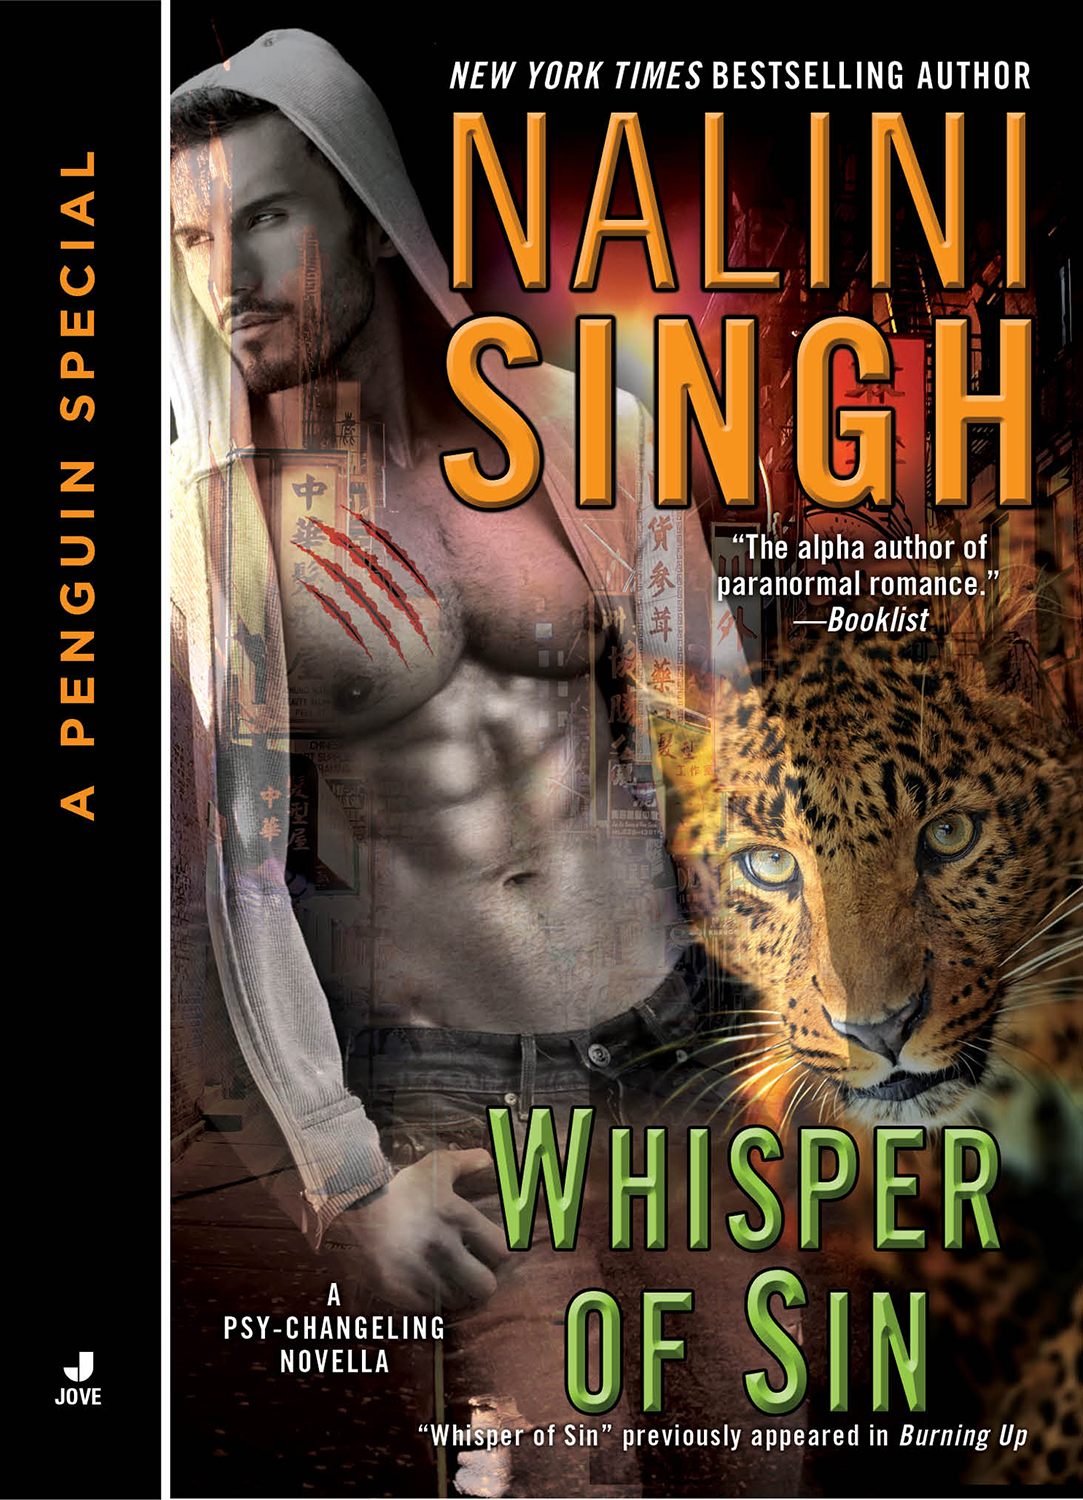 A Whisper of Sin (2014) by Nalini Singh